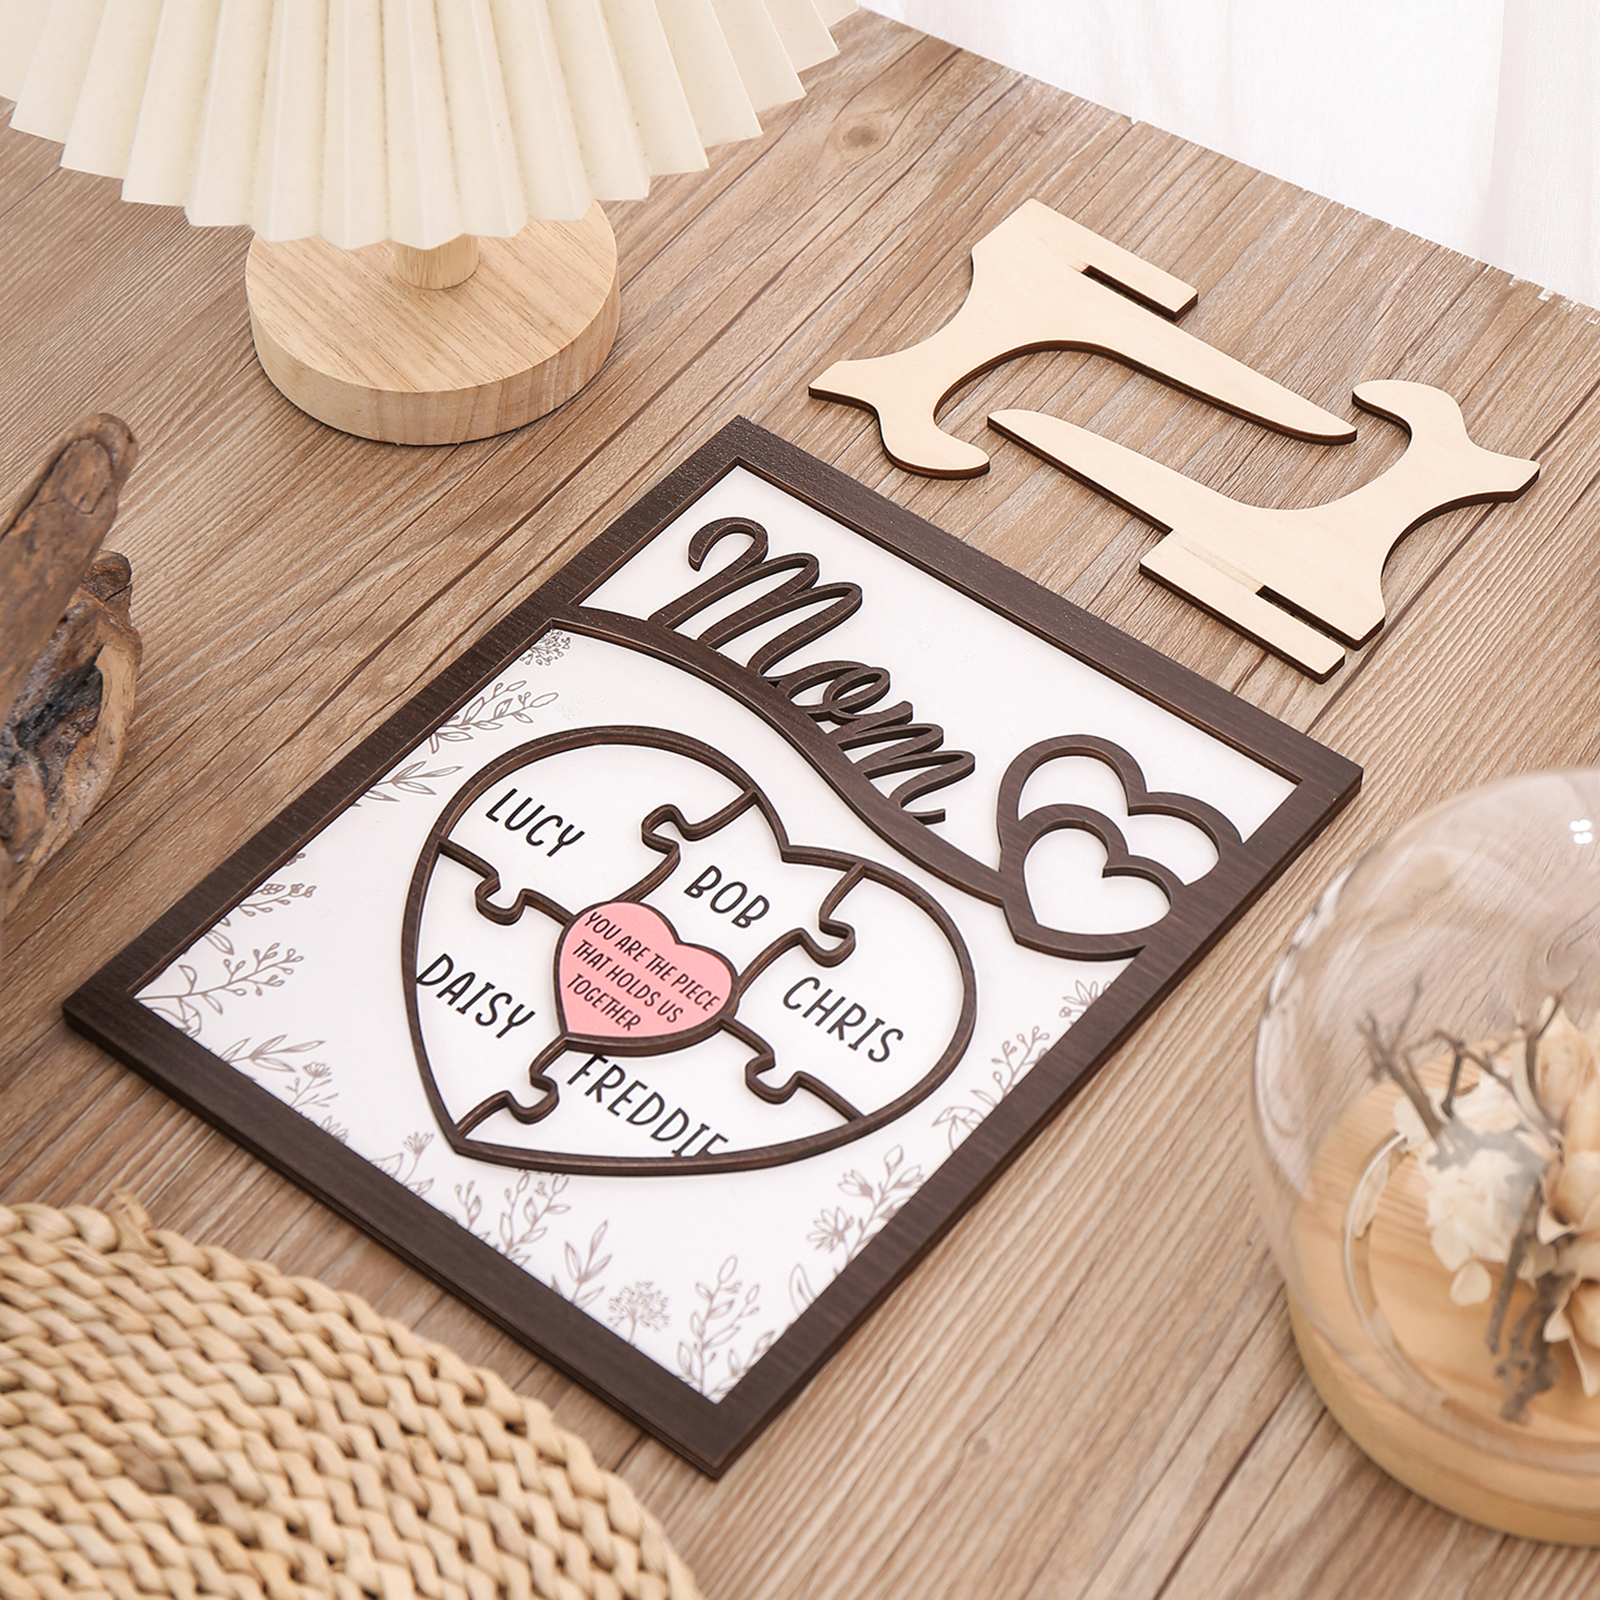 5 Names - Personalized Home Frame Wooden Ornaments Cute Bear Style Ornaments for Mom